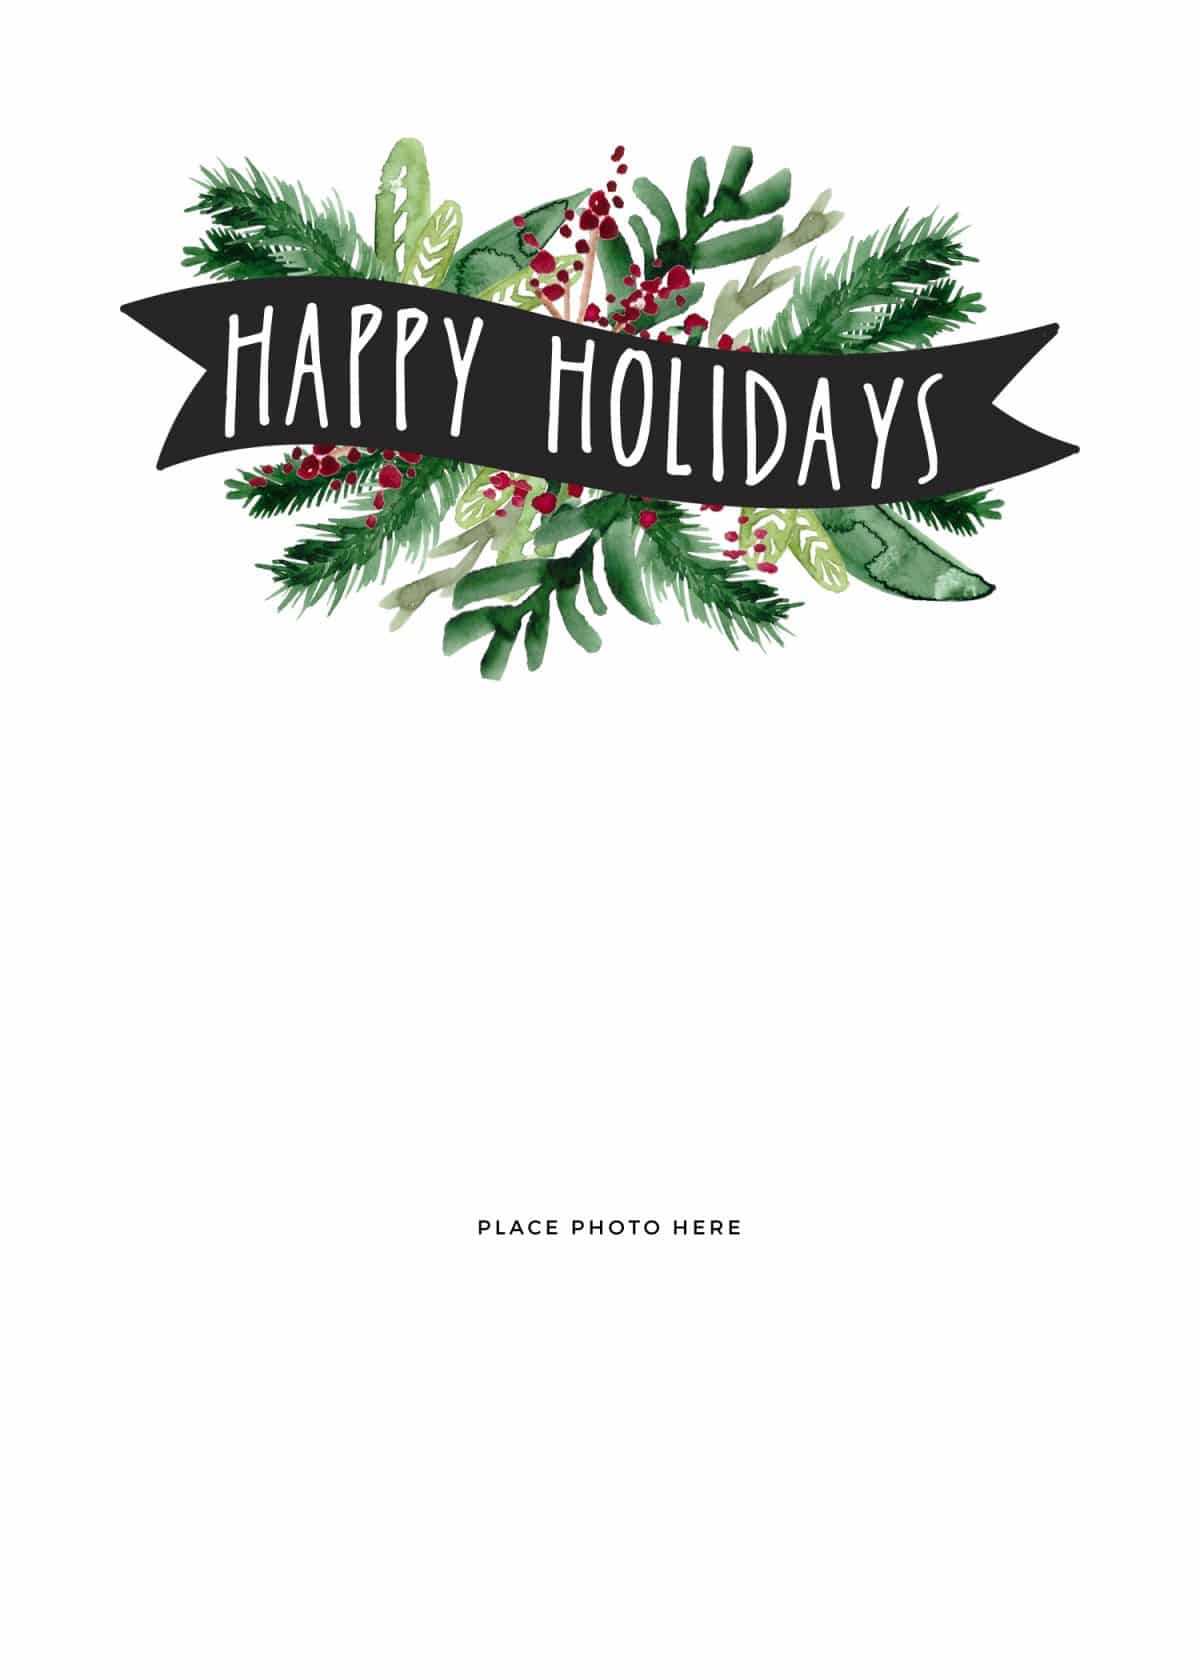 Make Your Own Photo Christmas Cards (For Free!) – Somewhat Regarding Printable Holiday Card Templates